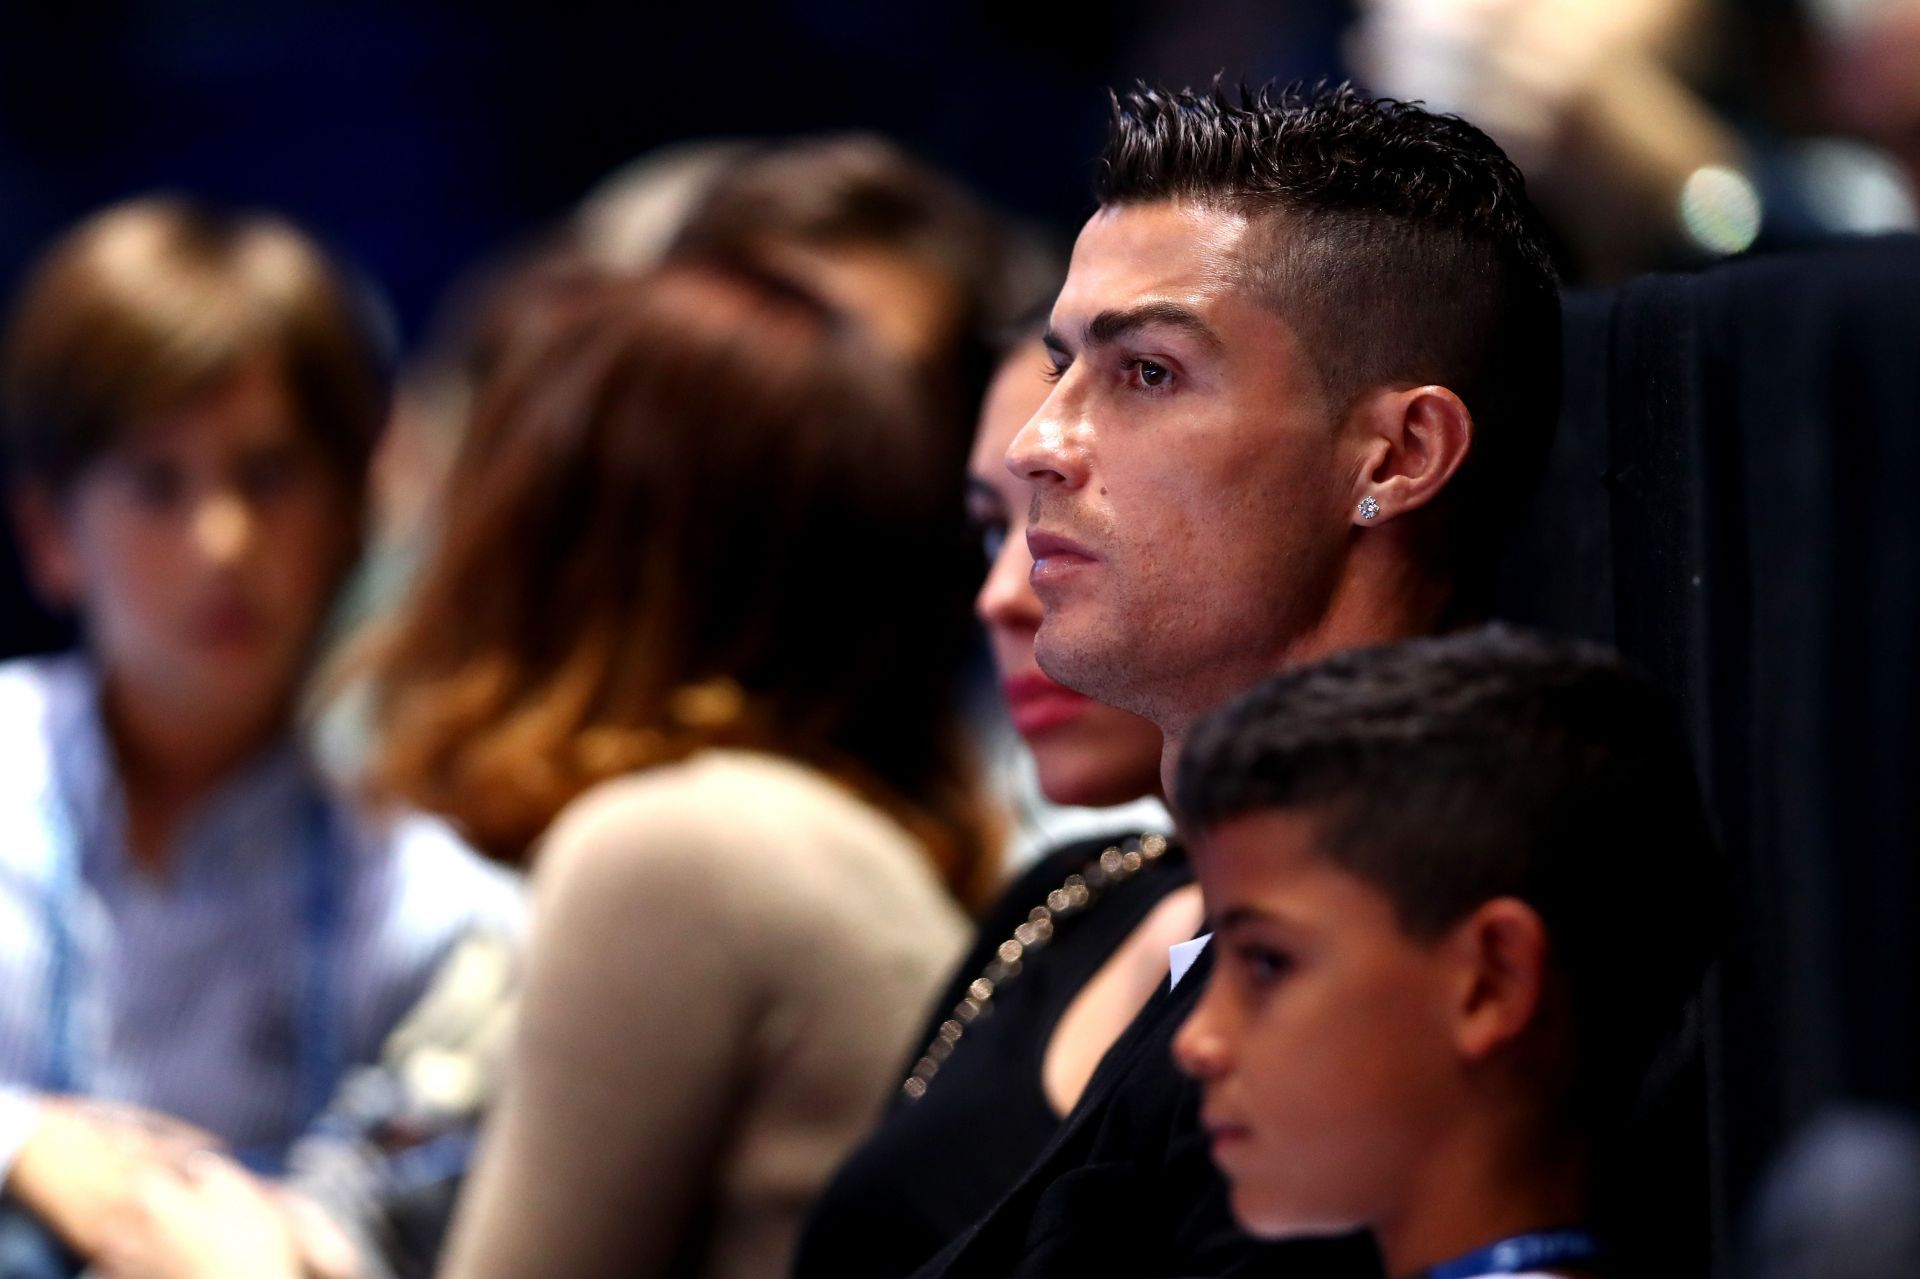 Ronaldo may be an interested spectator